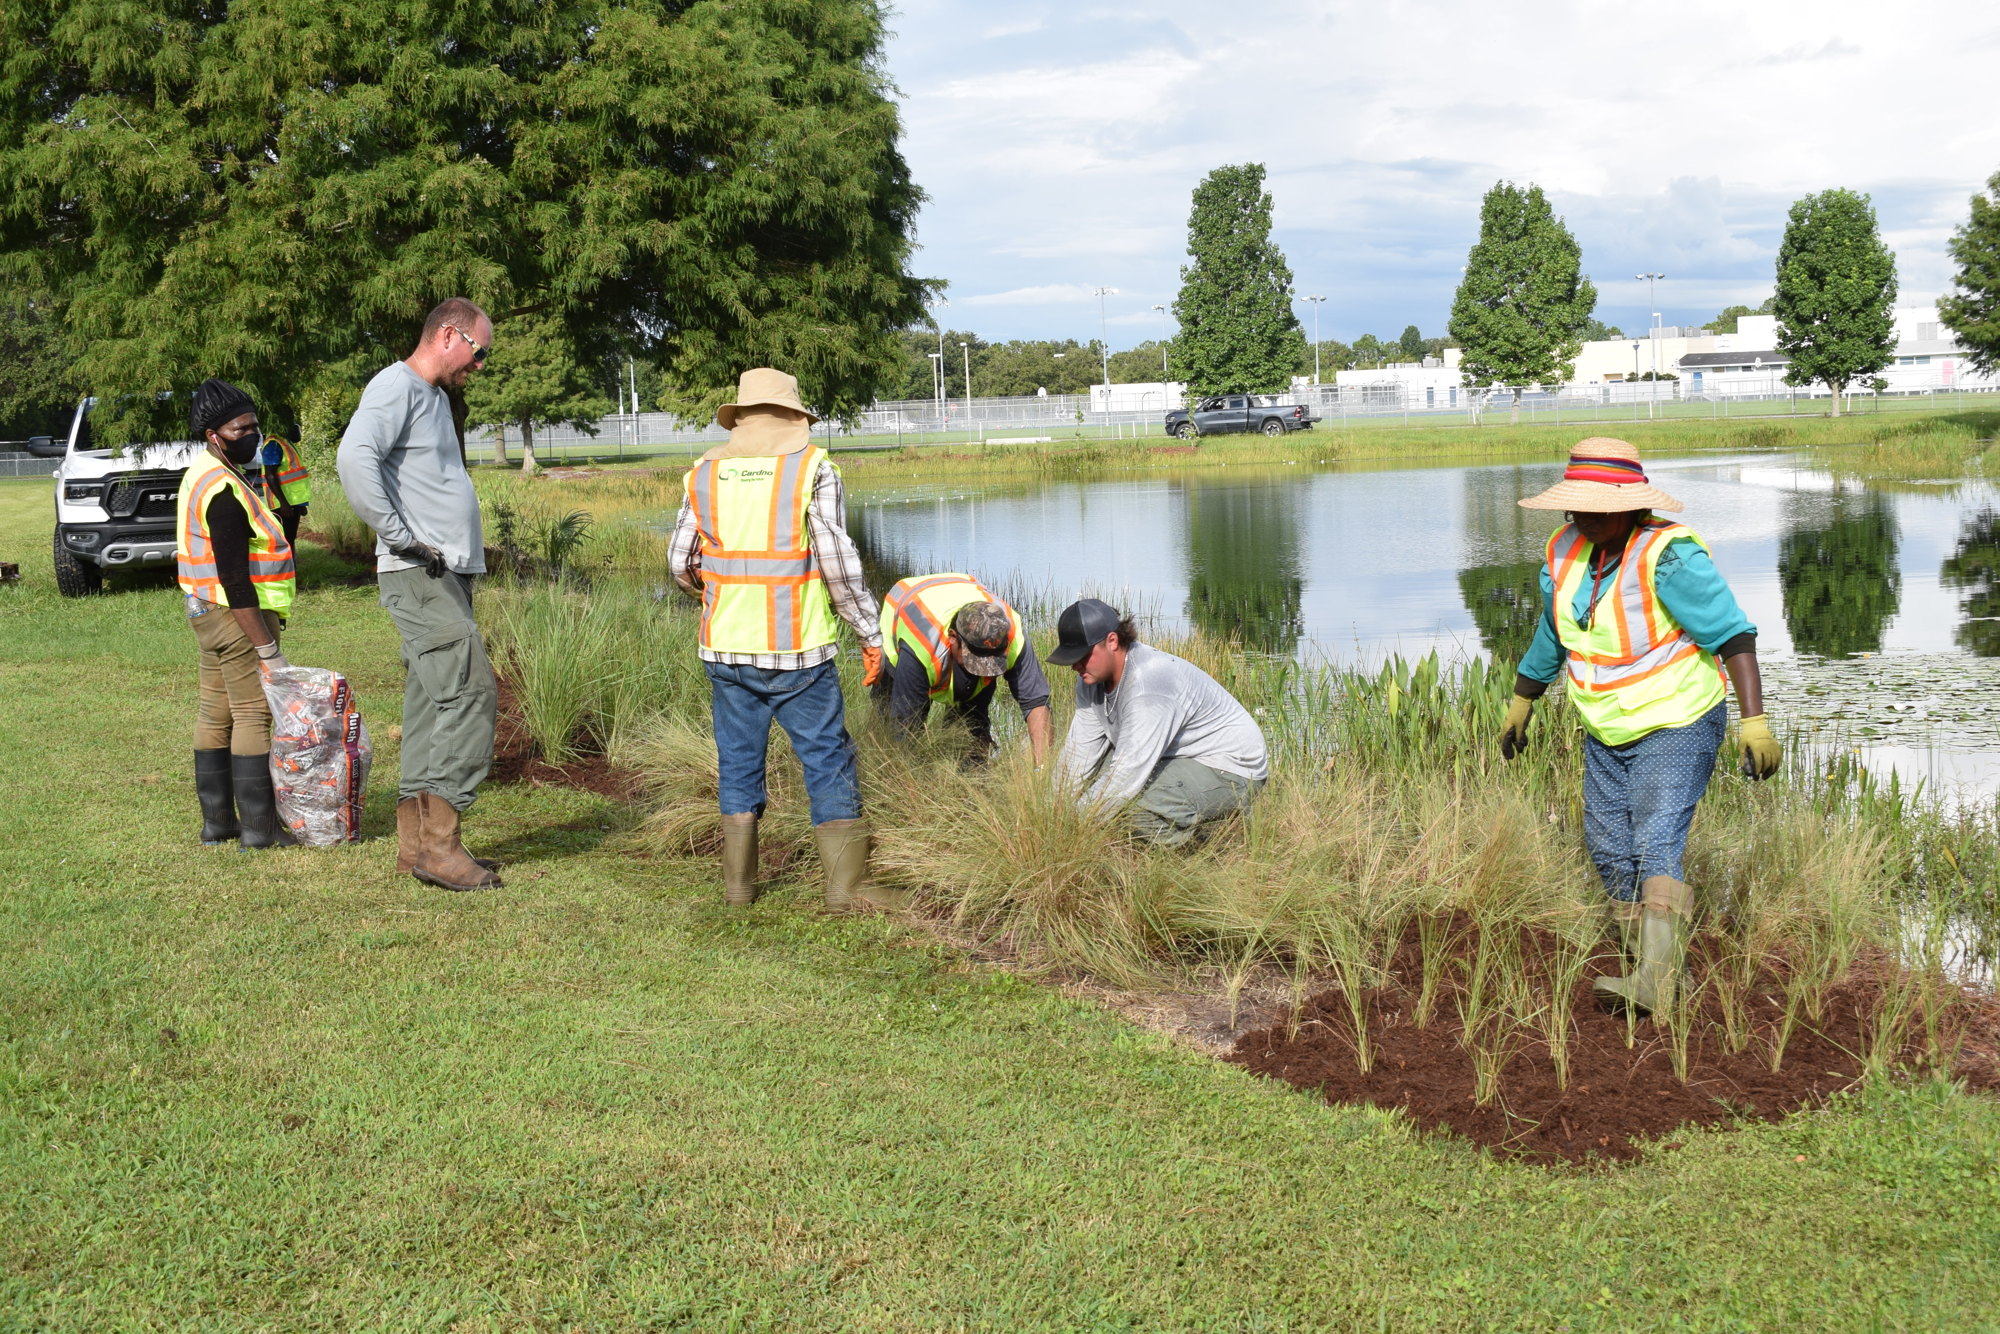 The Cardno crew puts in plants along a pond in Greenbrook.